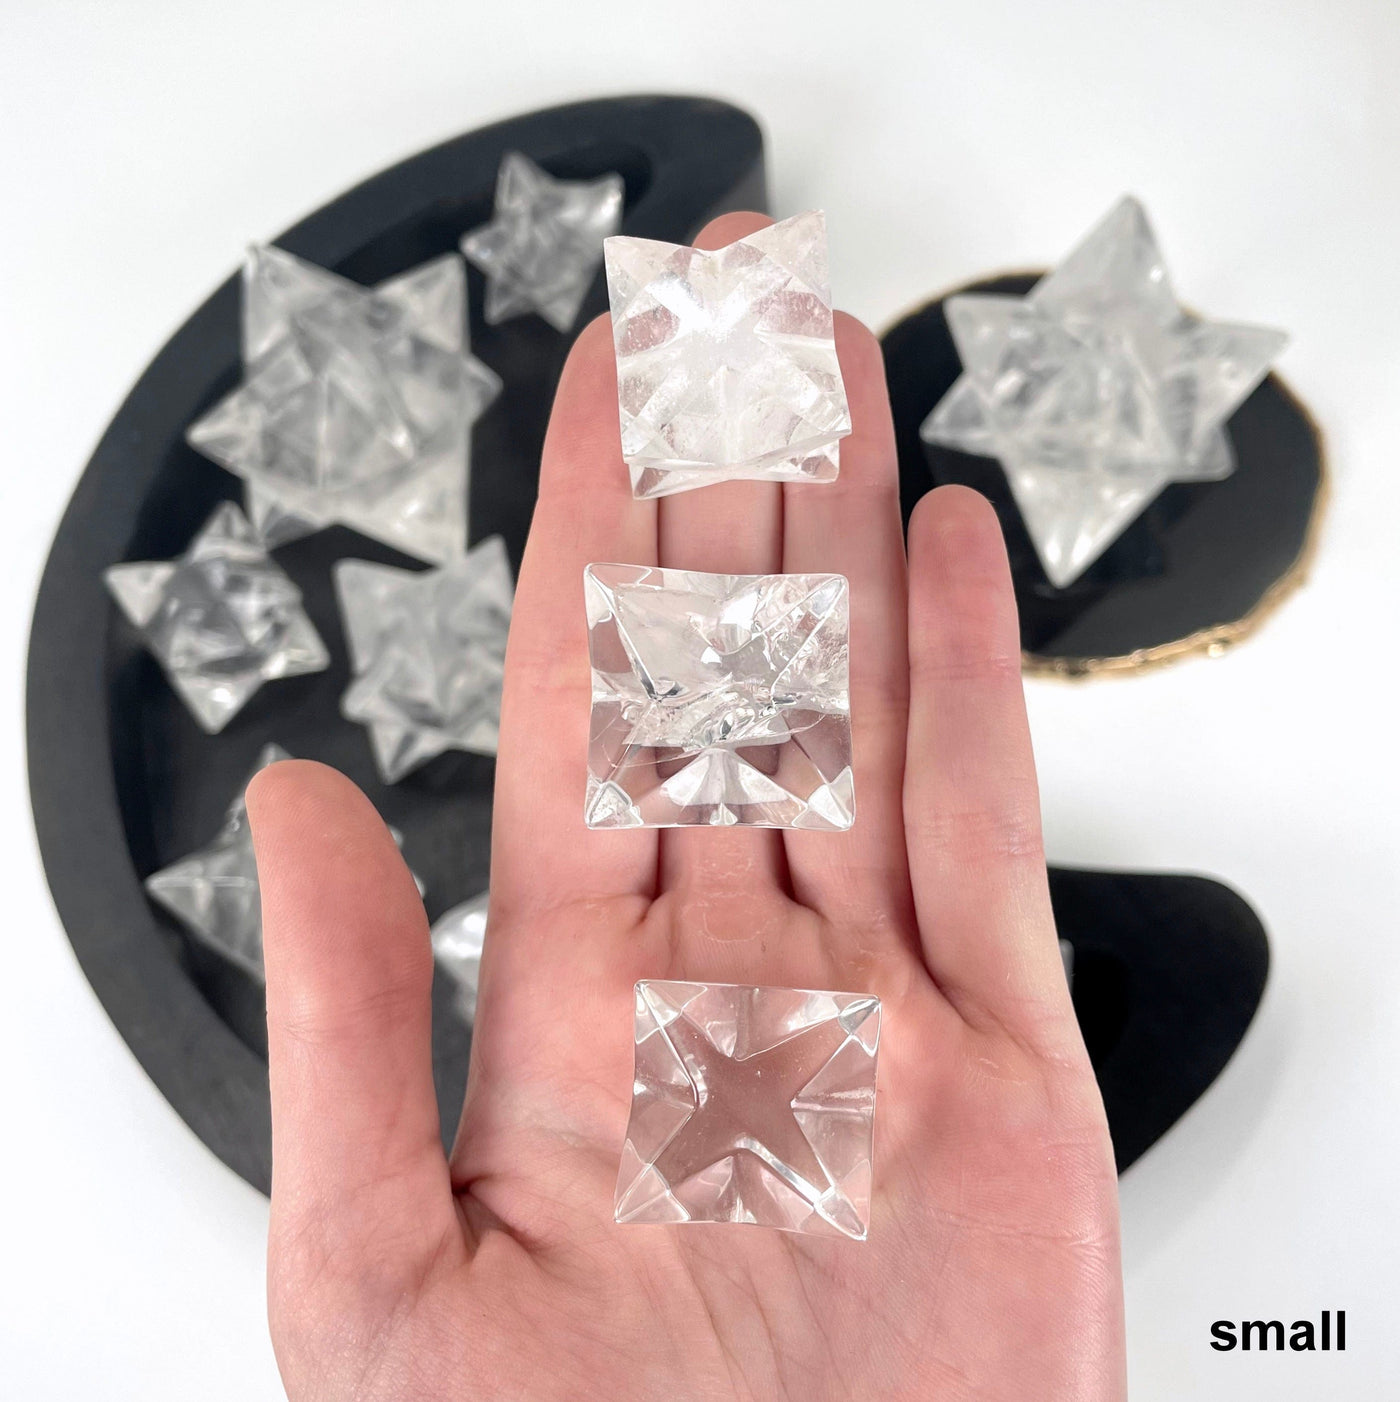 three small crystal quartz merkabah stars in hand for size reference and possible variations with others in background display